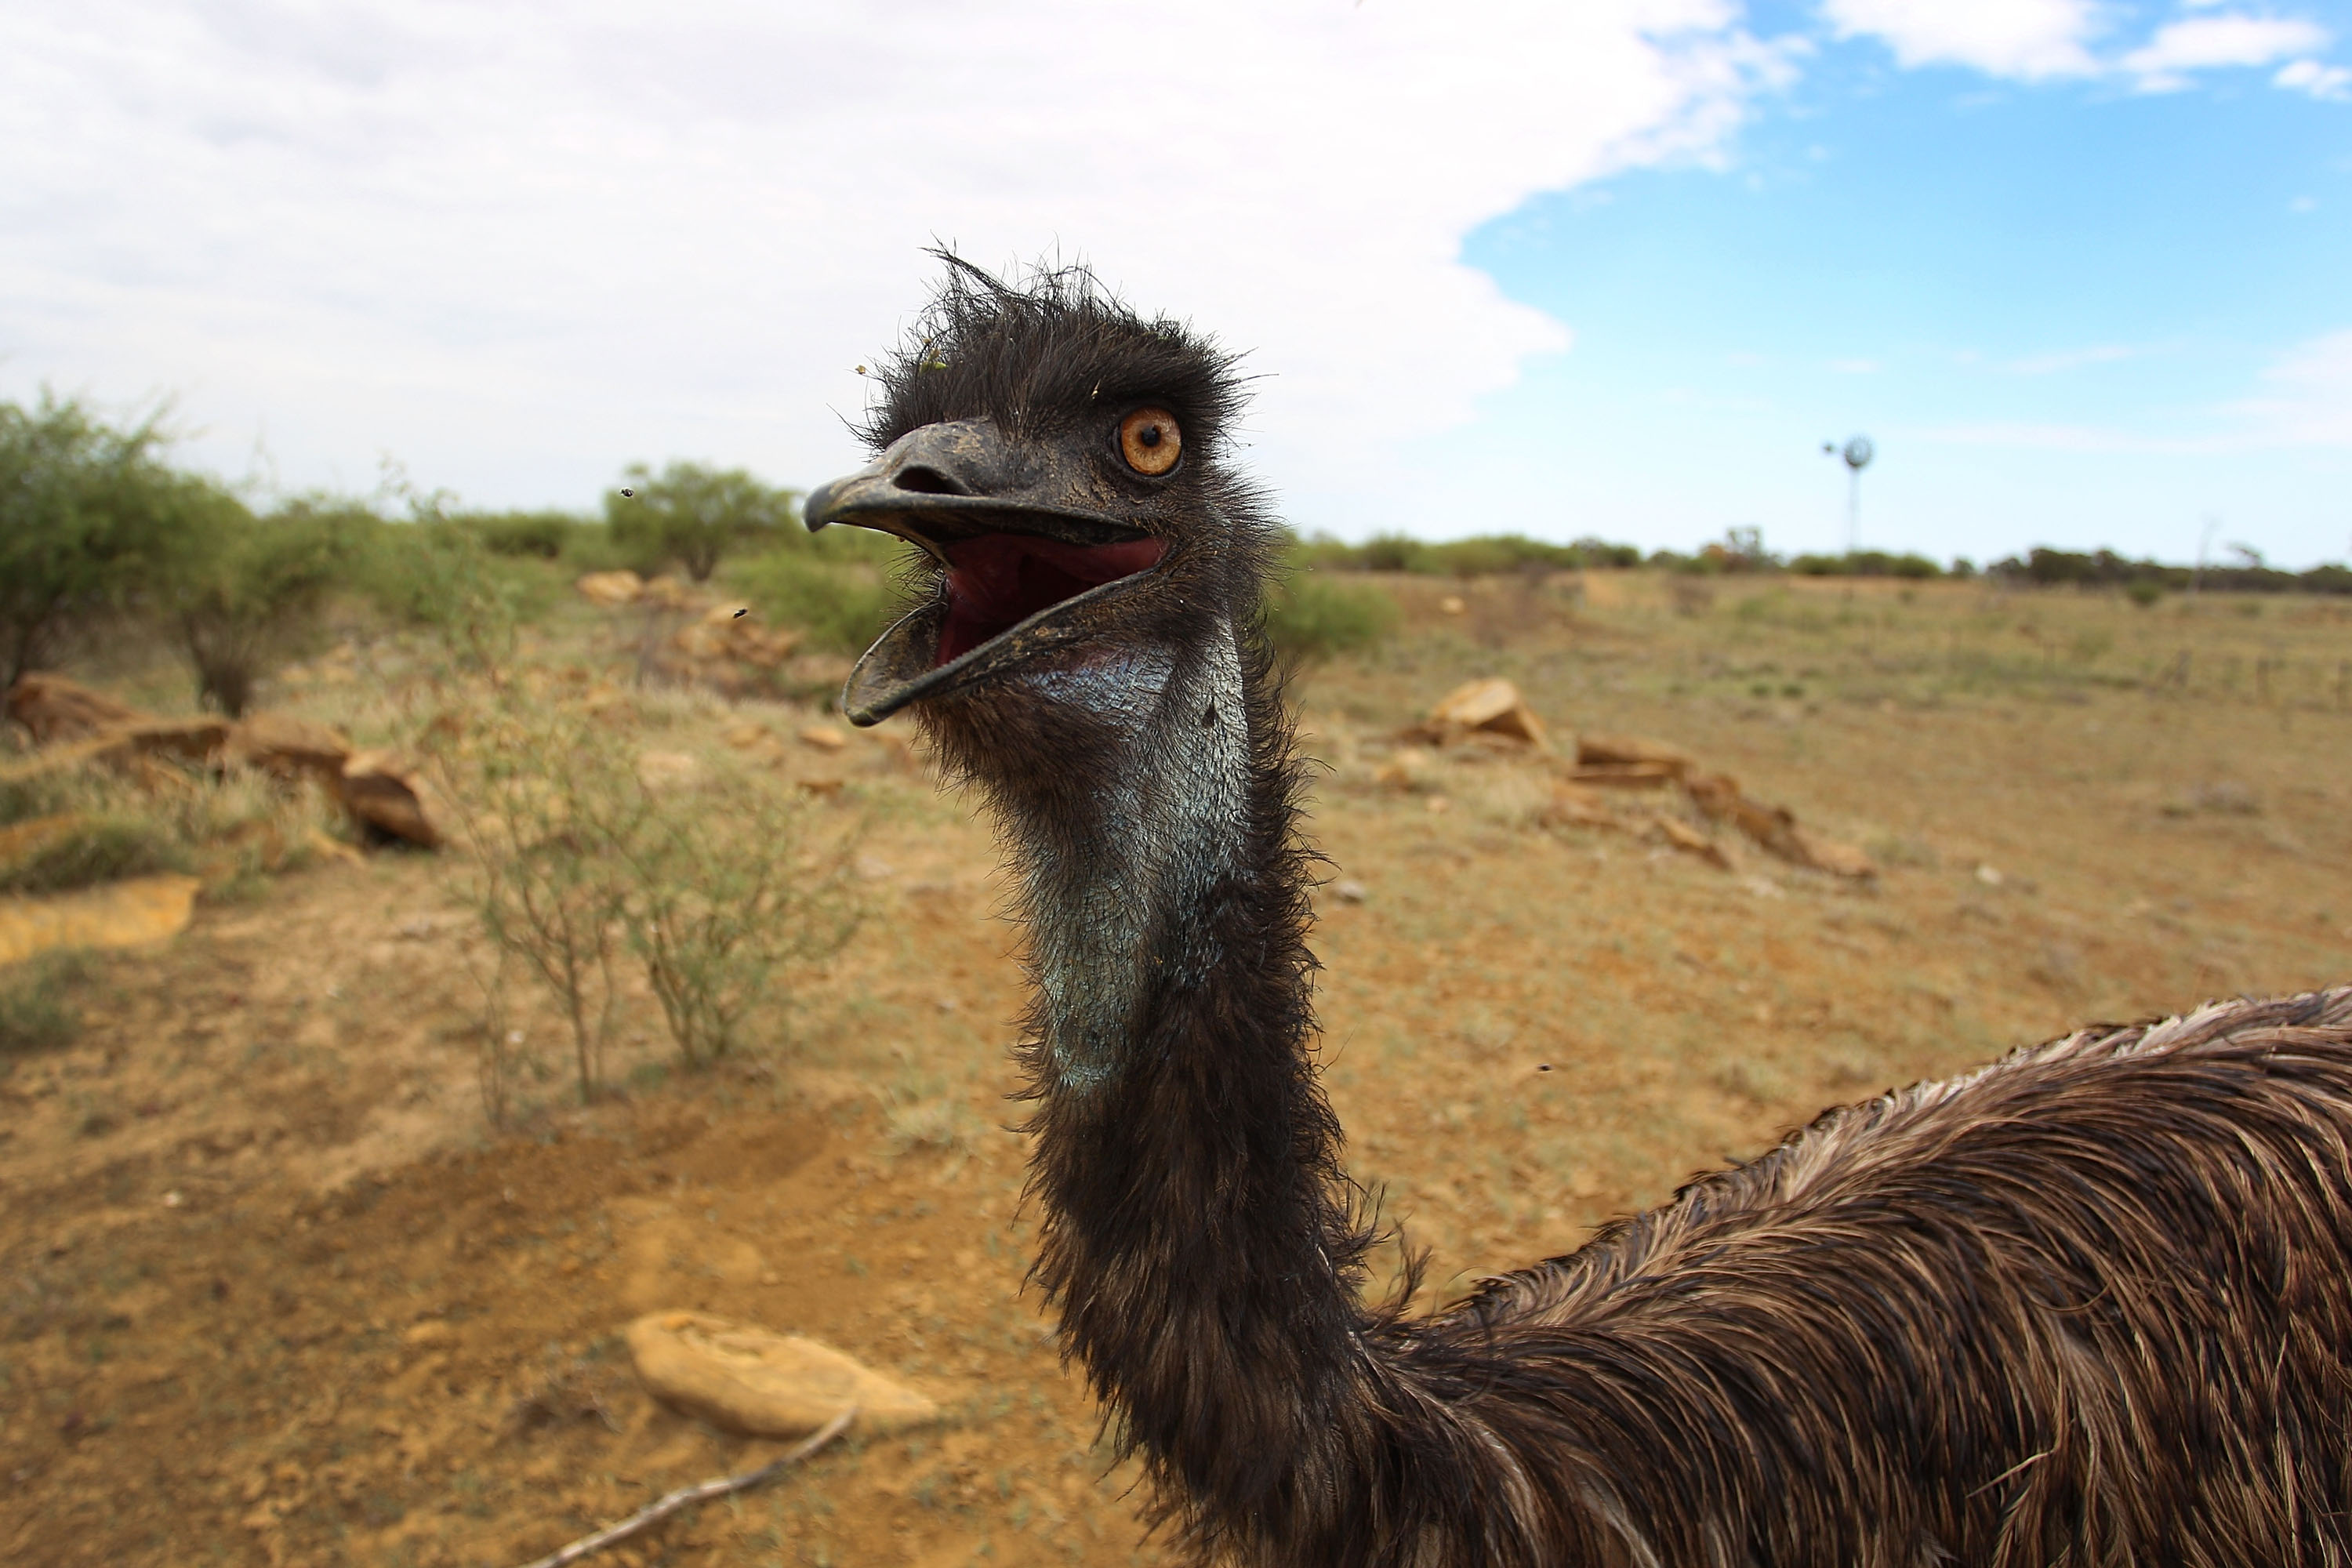 Ohio Officers Give Chase to Runaway Emu Dubbed ‘Large Chook’